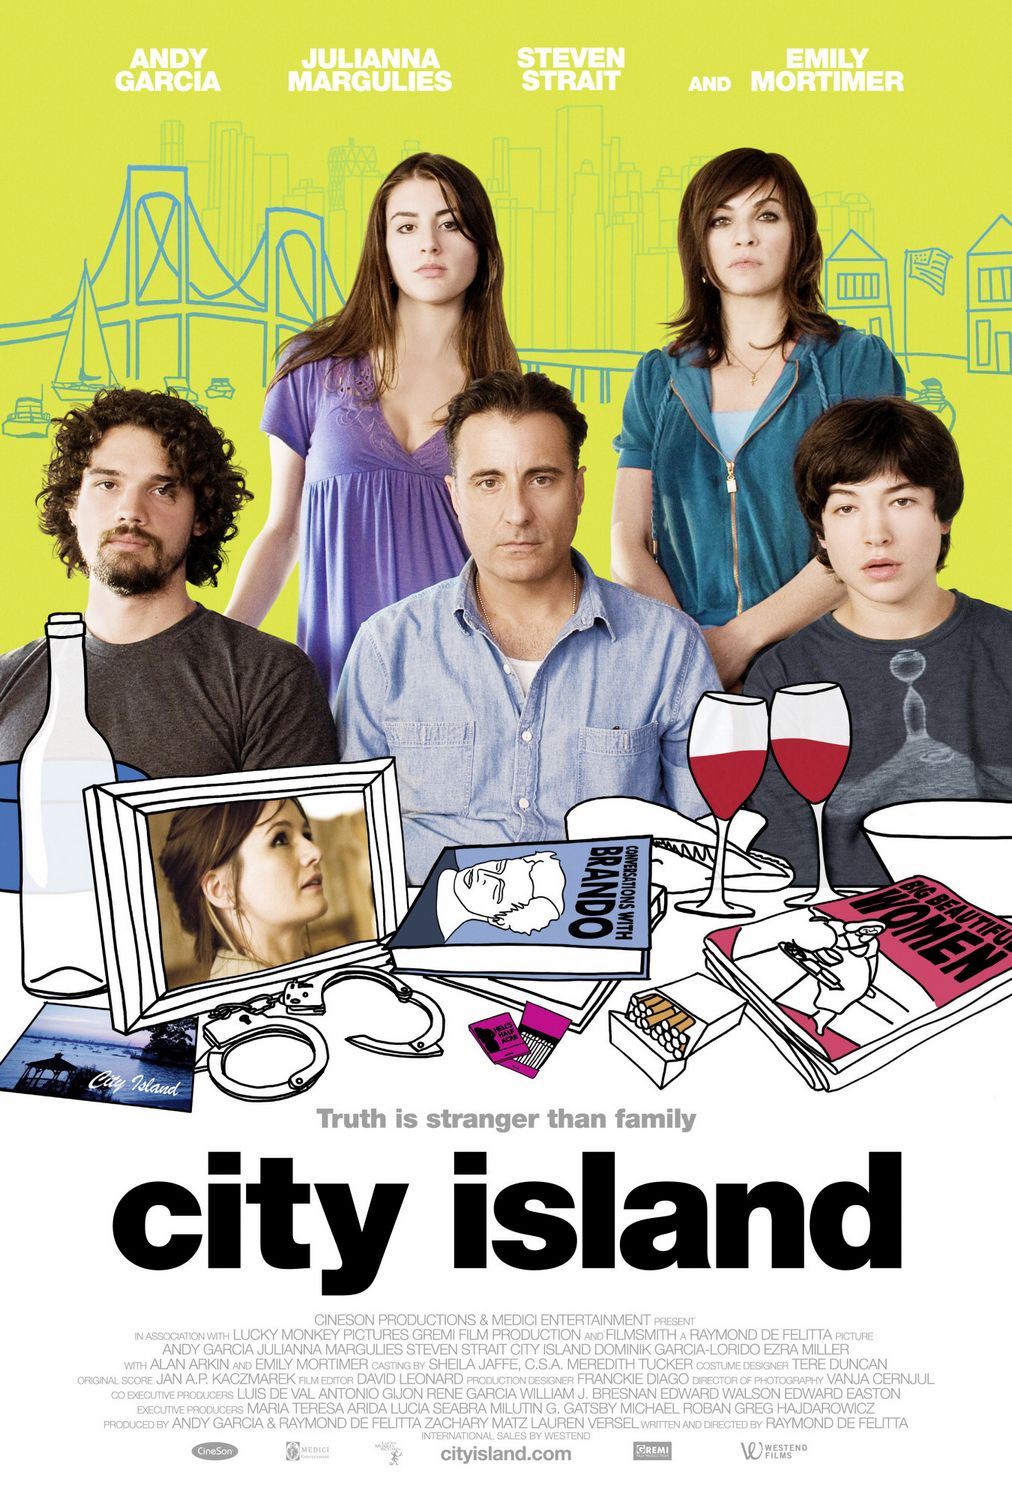 City Island: Collections download the new version for iphone